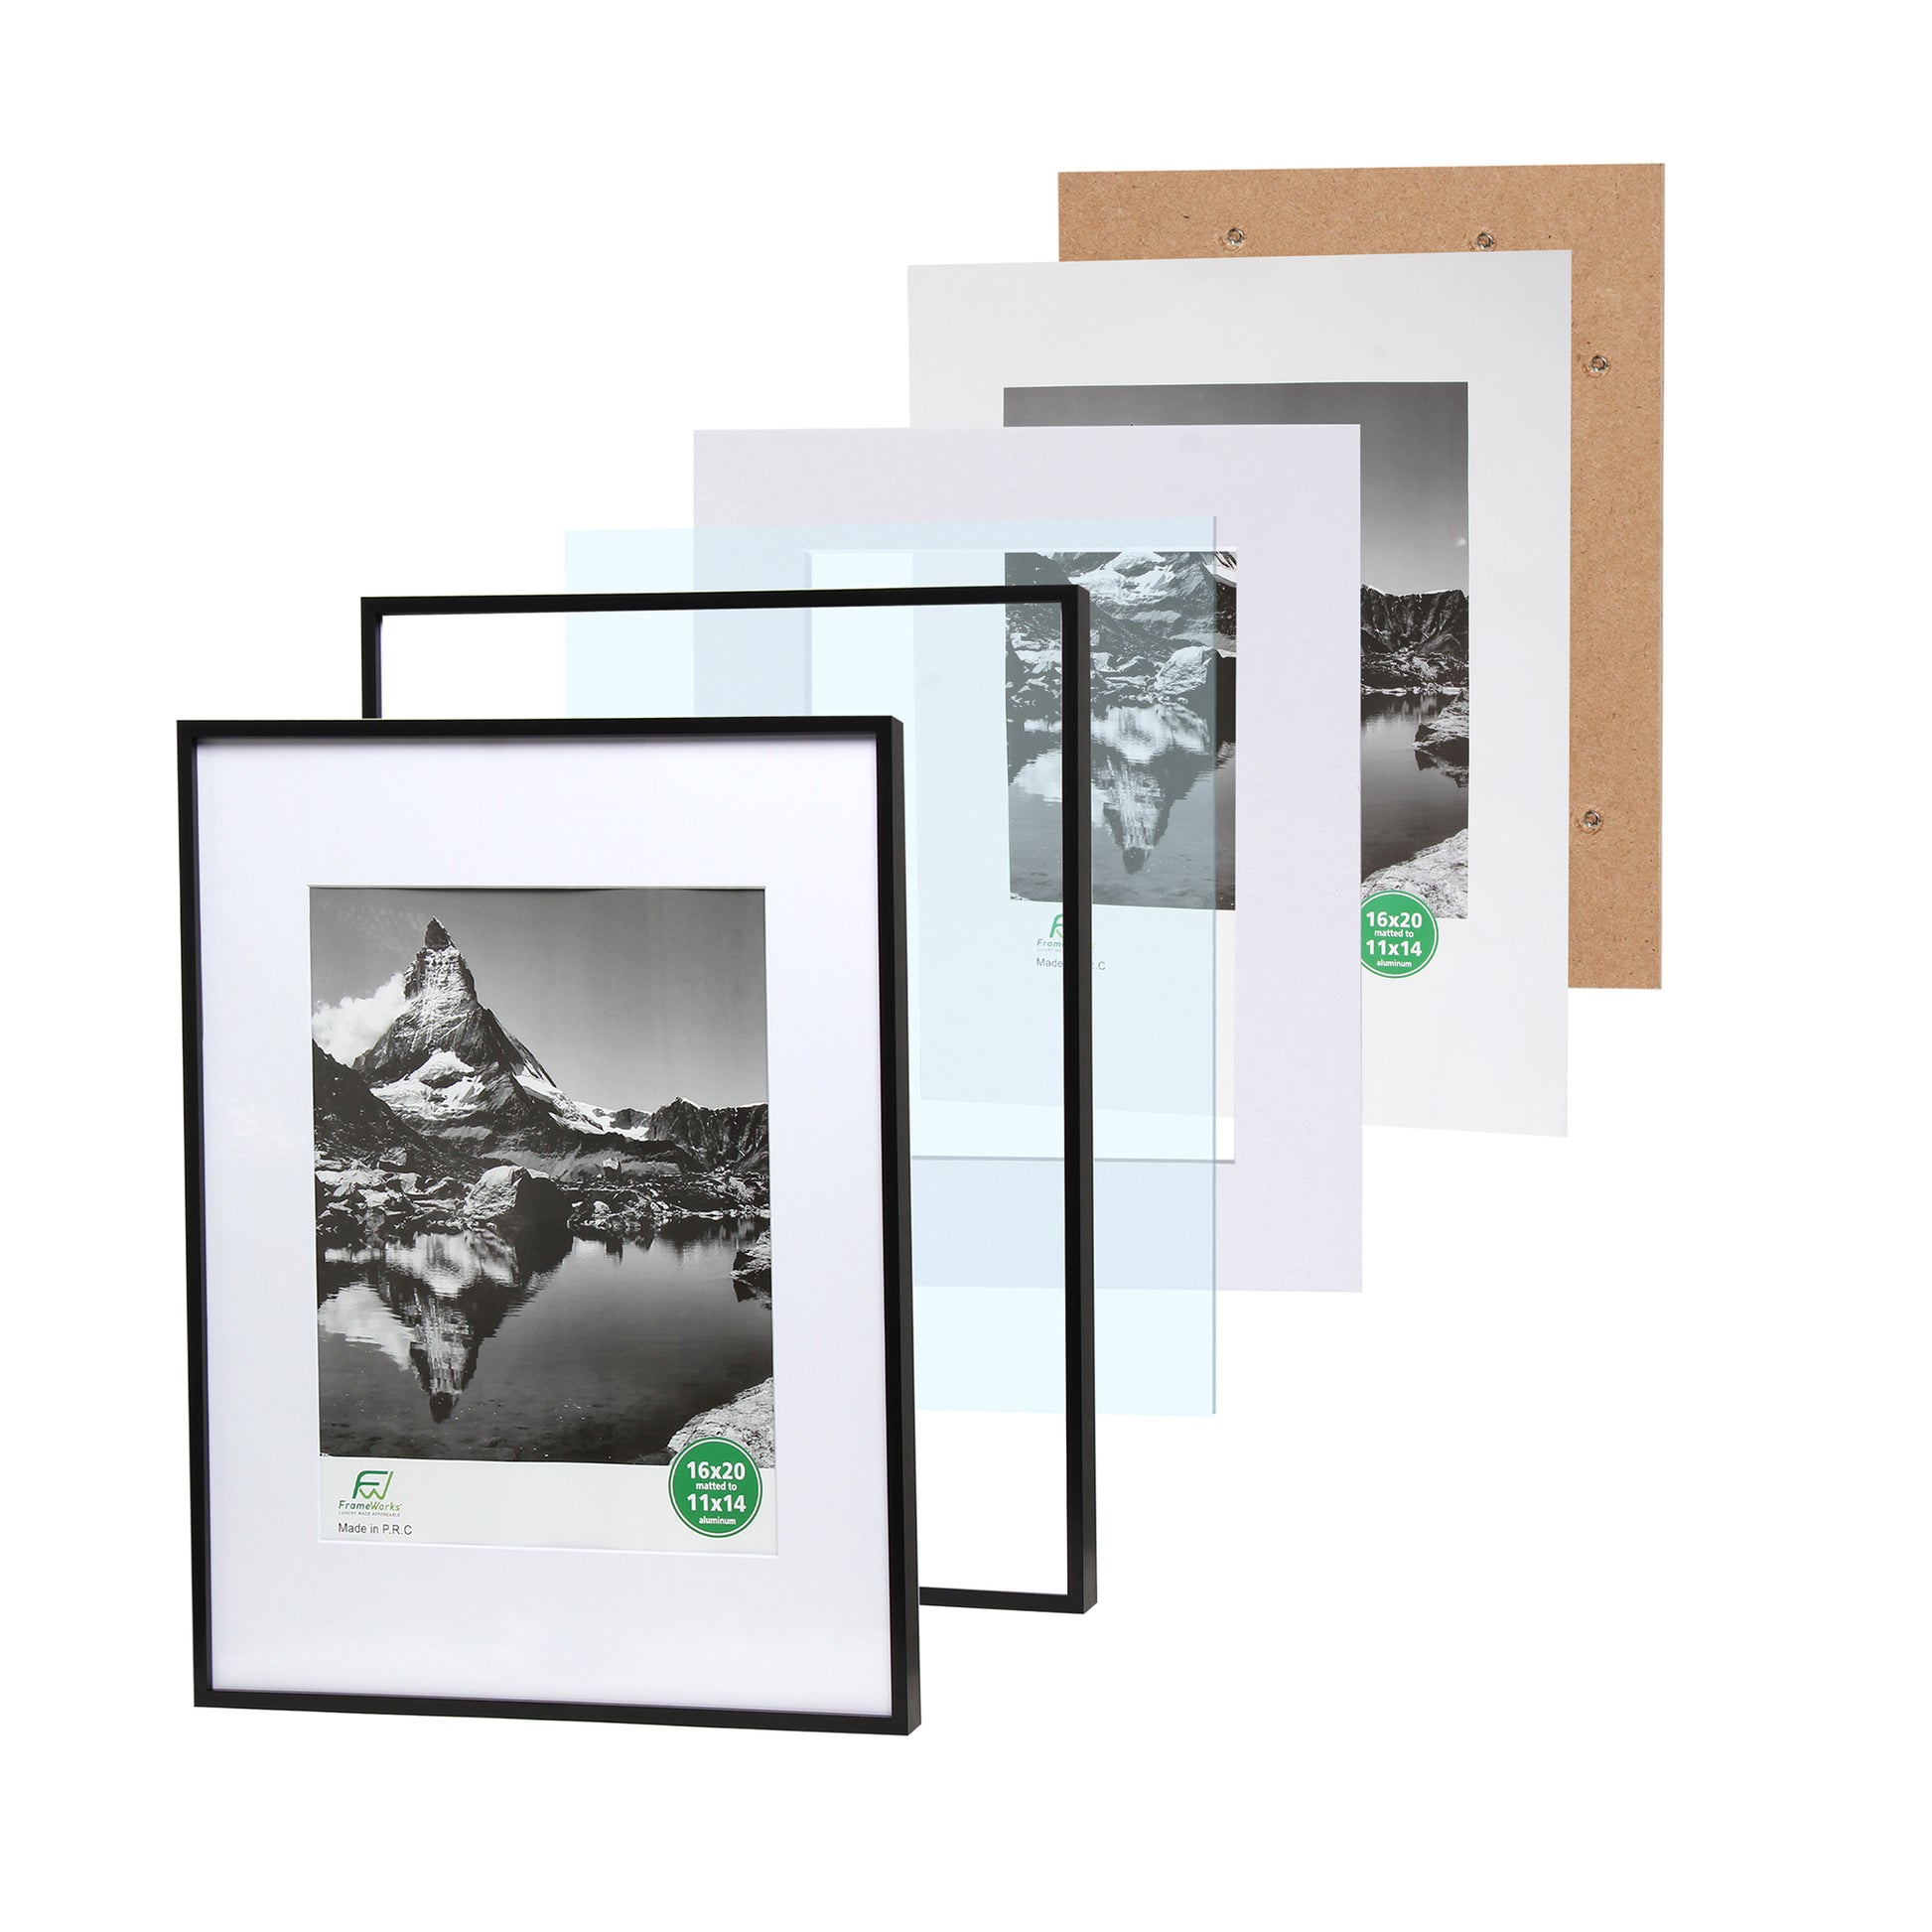 16 x 20 Deluxe Black Aluminum Contemporary Picture Frame, 11 x 14 –  FrameWorks